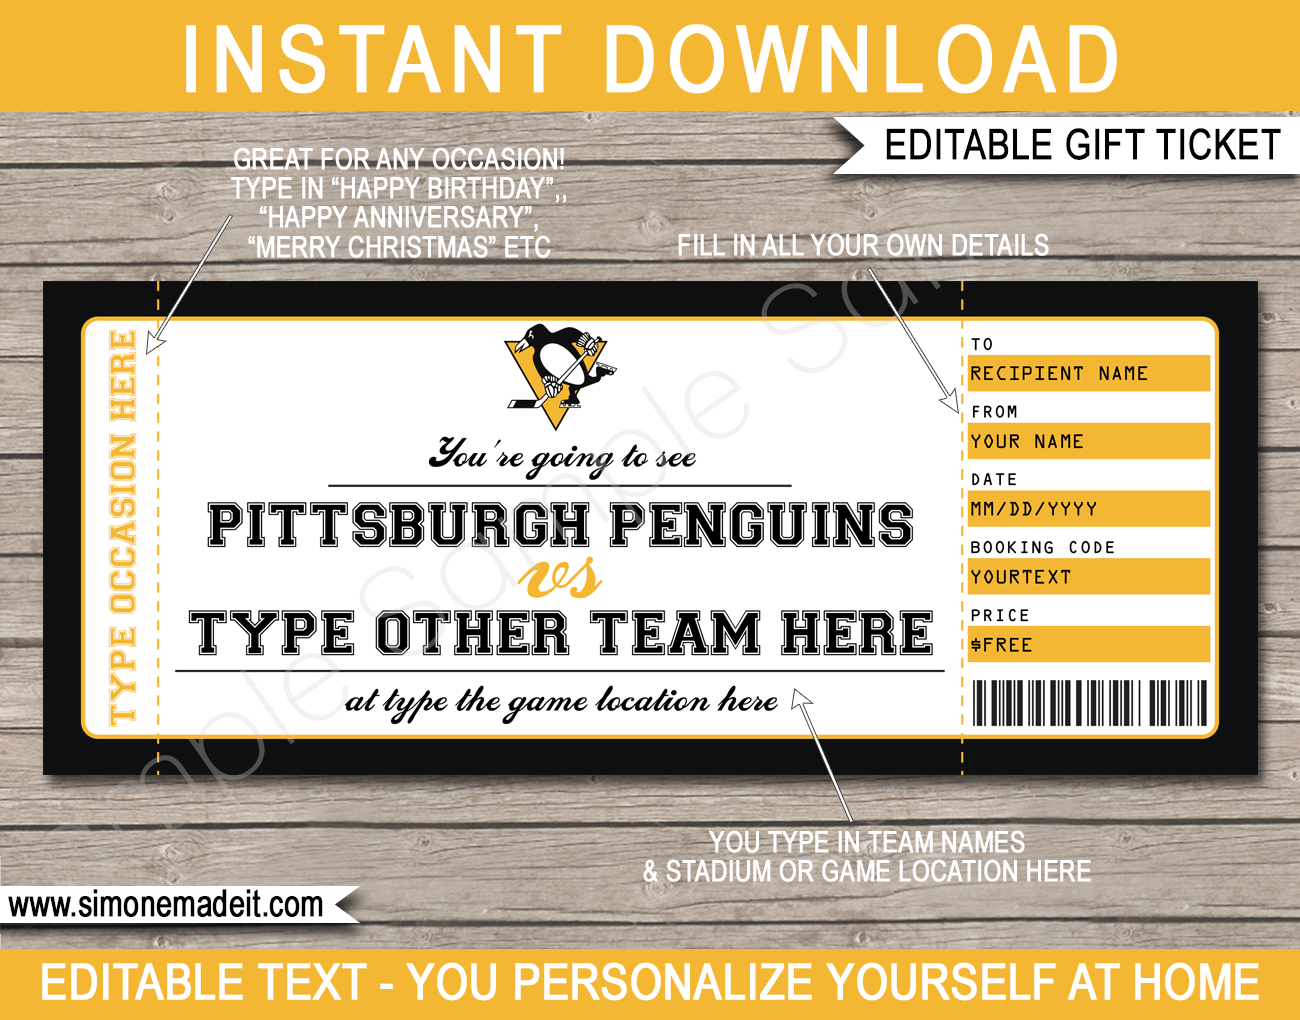 Christmas Hockey Ticket Template  Printable Game Ticket Gift Ideas